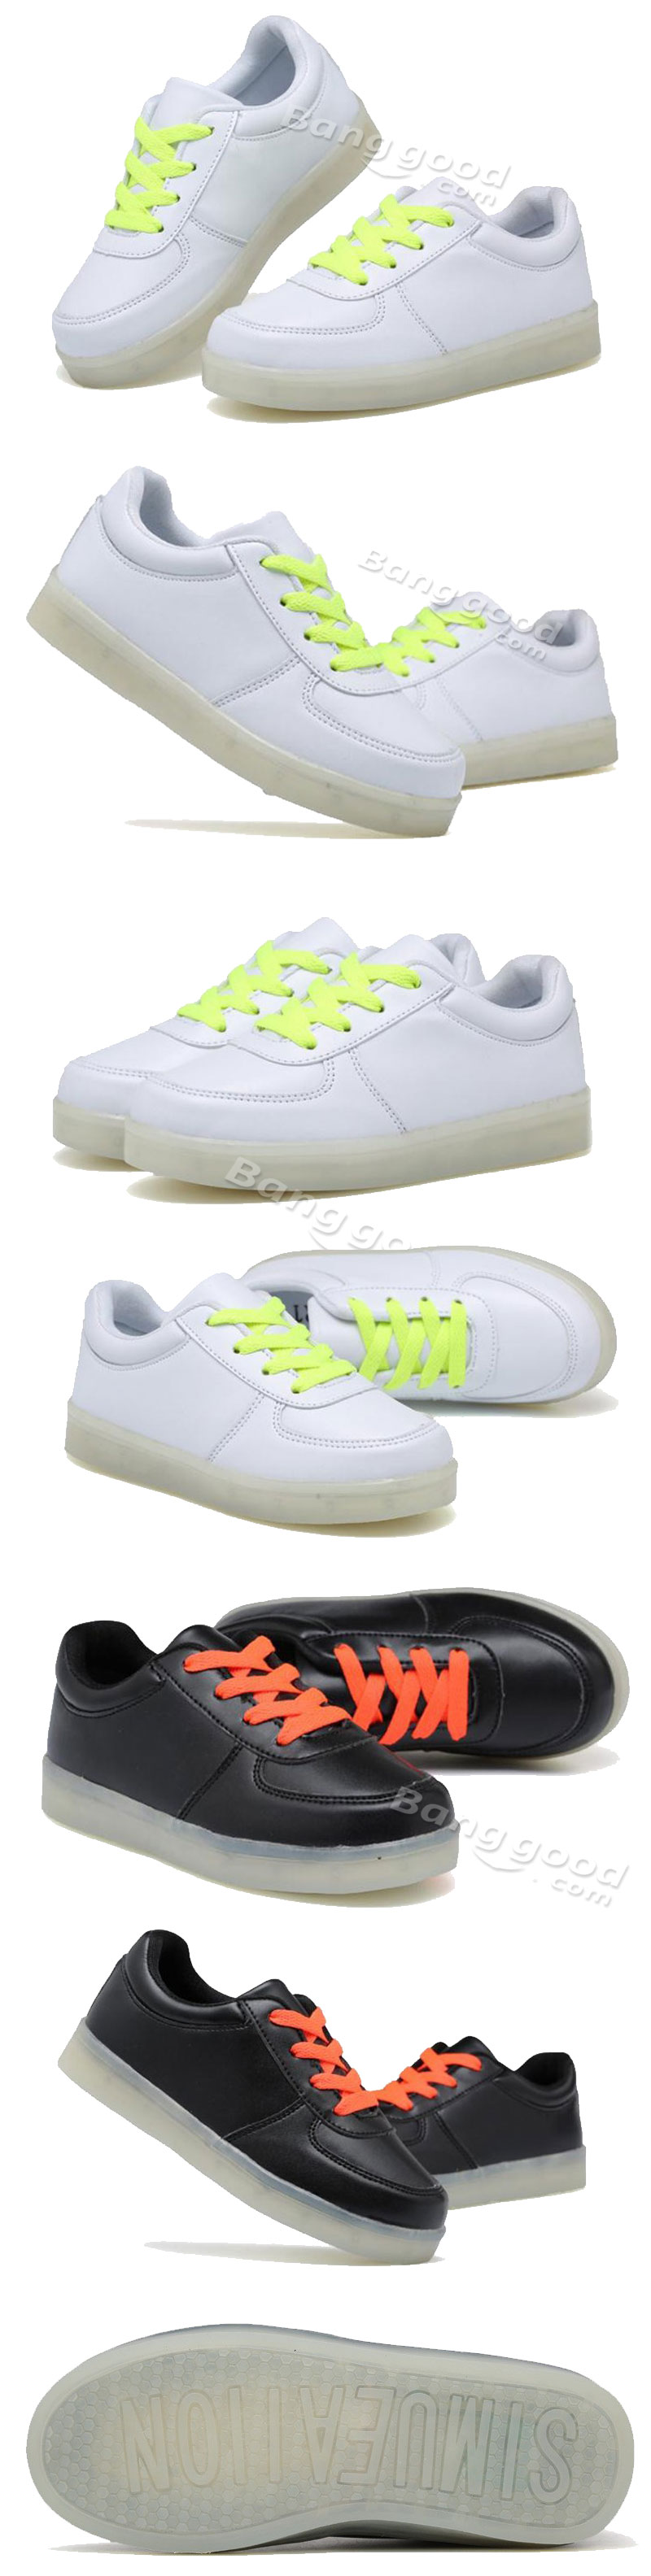 Children-Teenager-LED-Light-Sneakers-PU-Leather-Kid-Casual-Shine-Boys-Girls-Lace-Sports-Rubber-Shoes-1032889